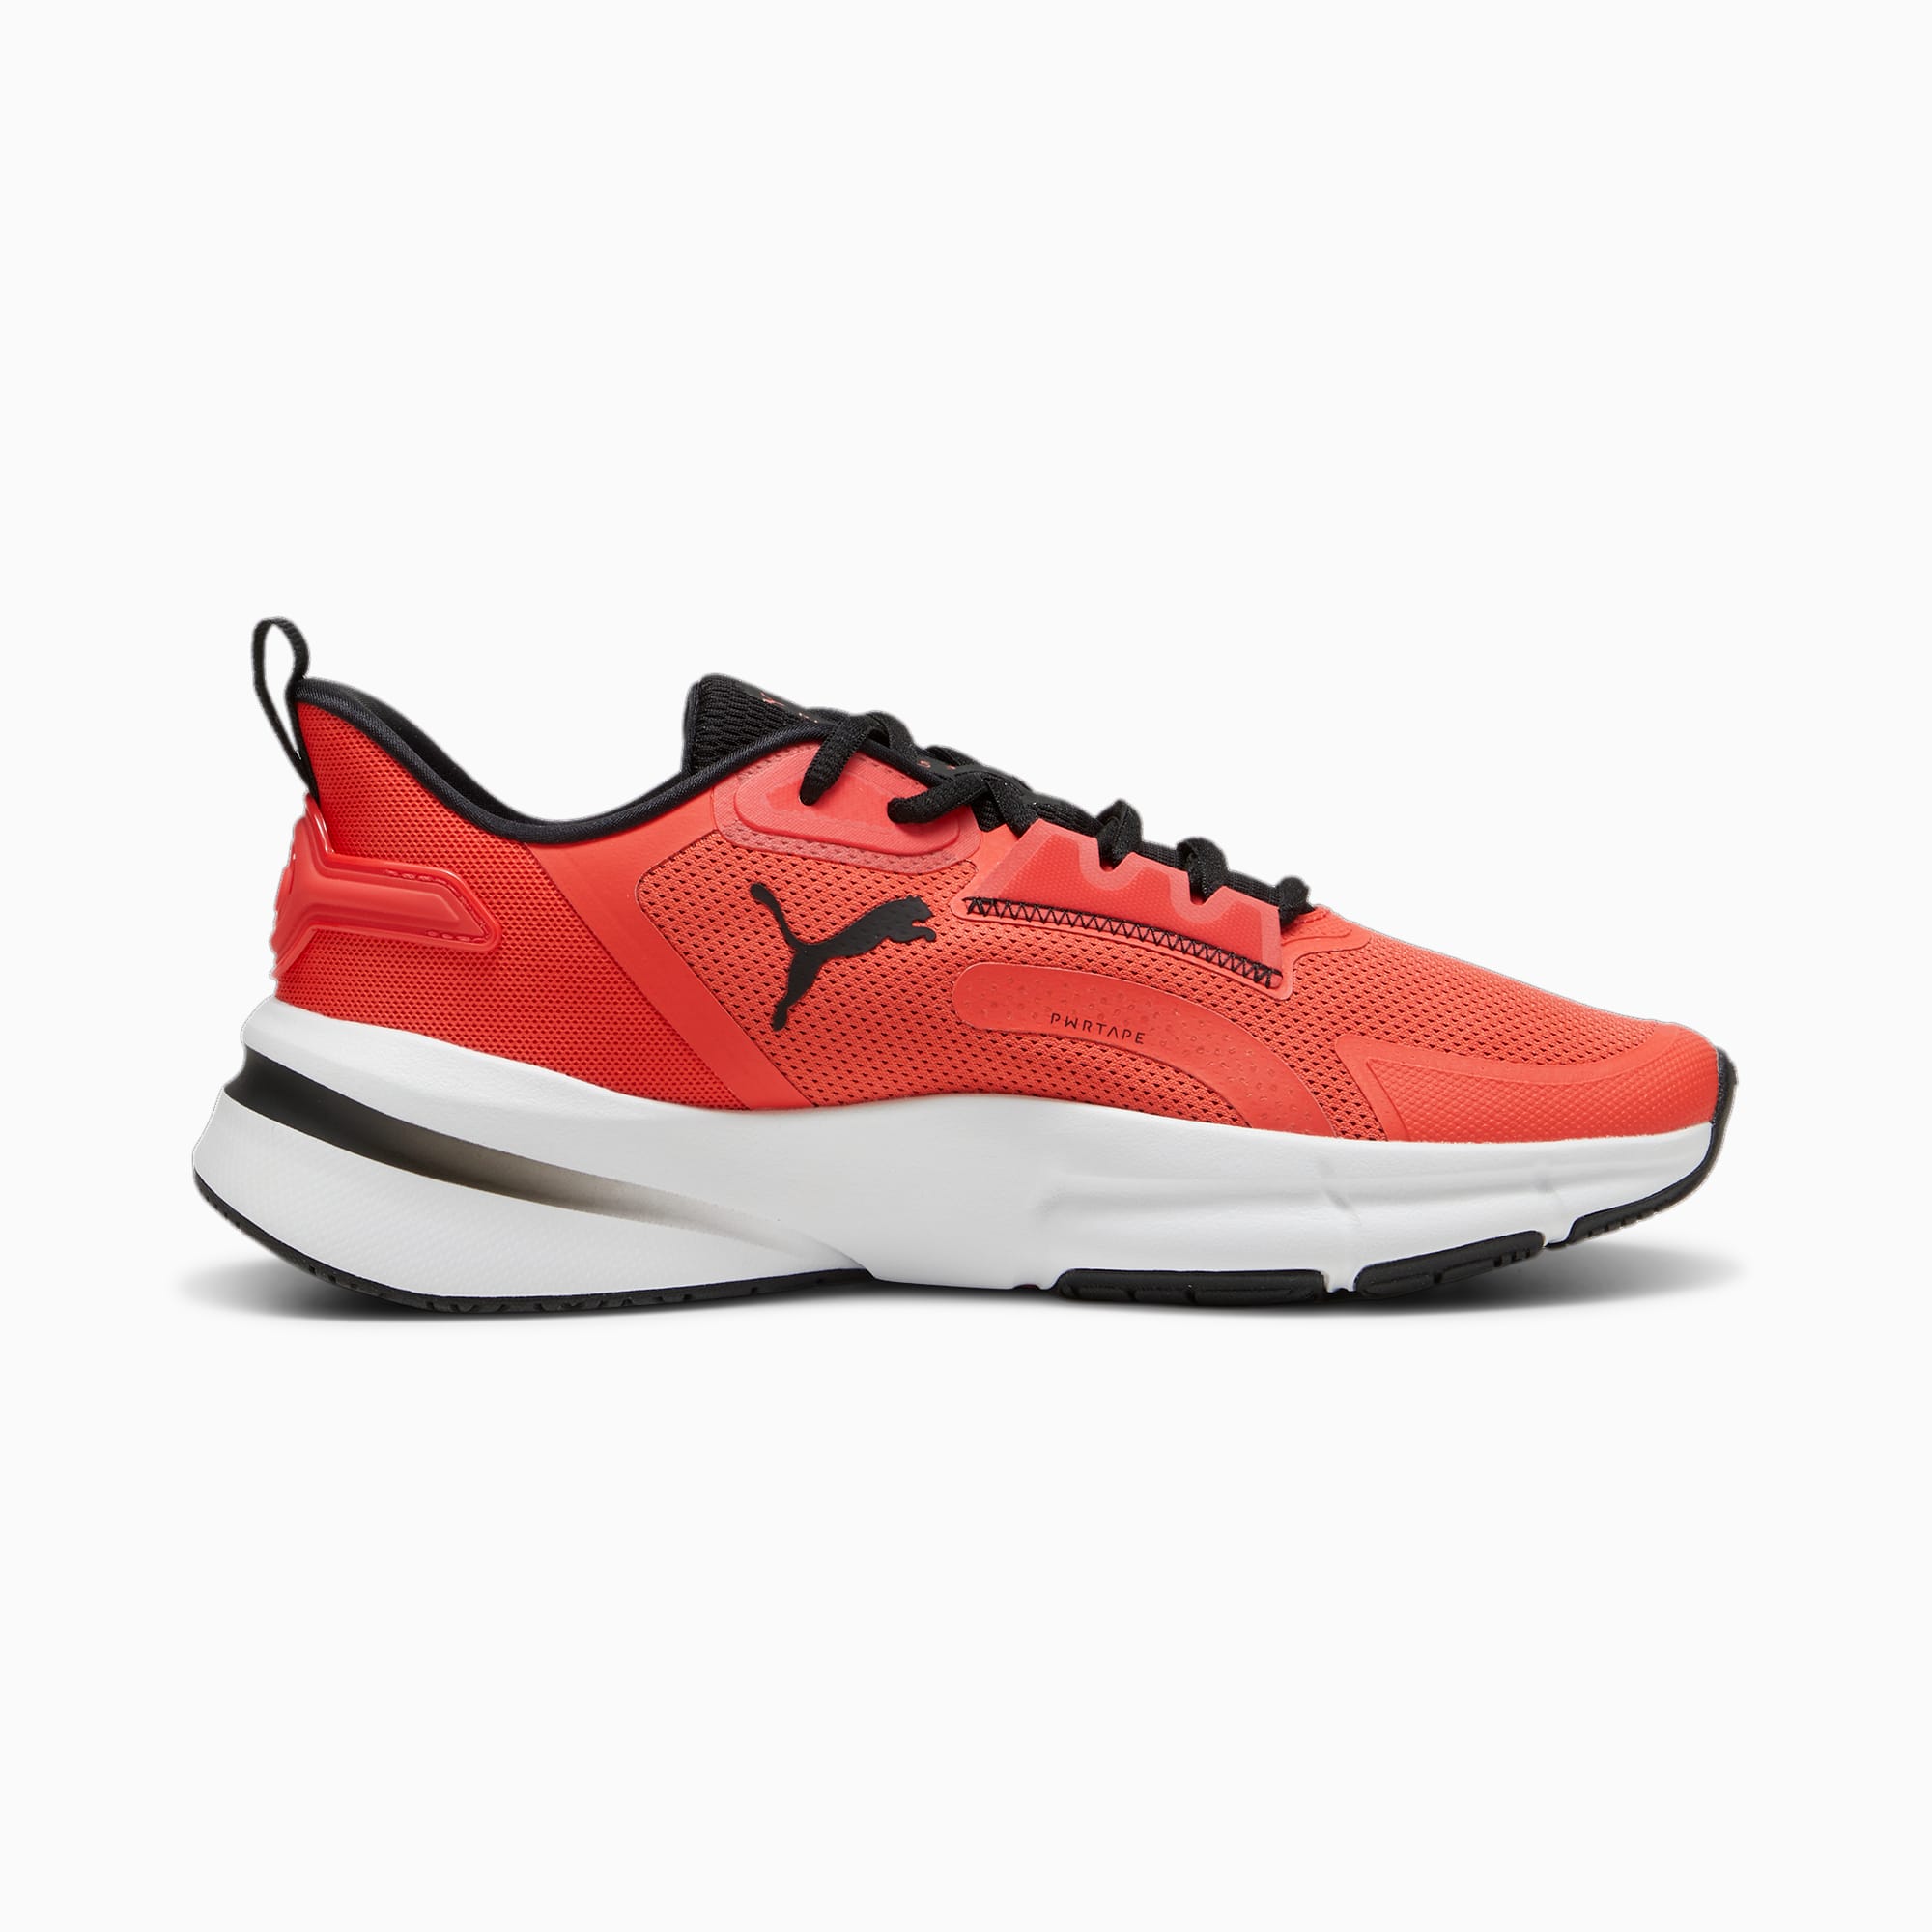 PUMA Pwrframe Tr 3 Men's Training Shoes, Active Red/Black/White, Size 35,5, Shoes